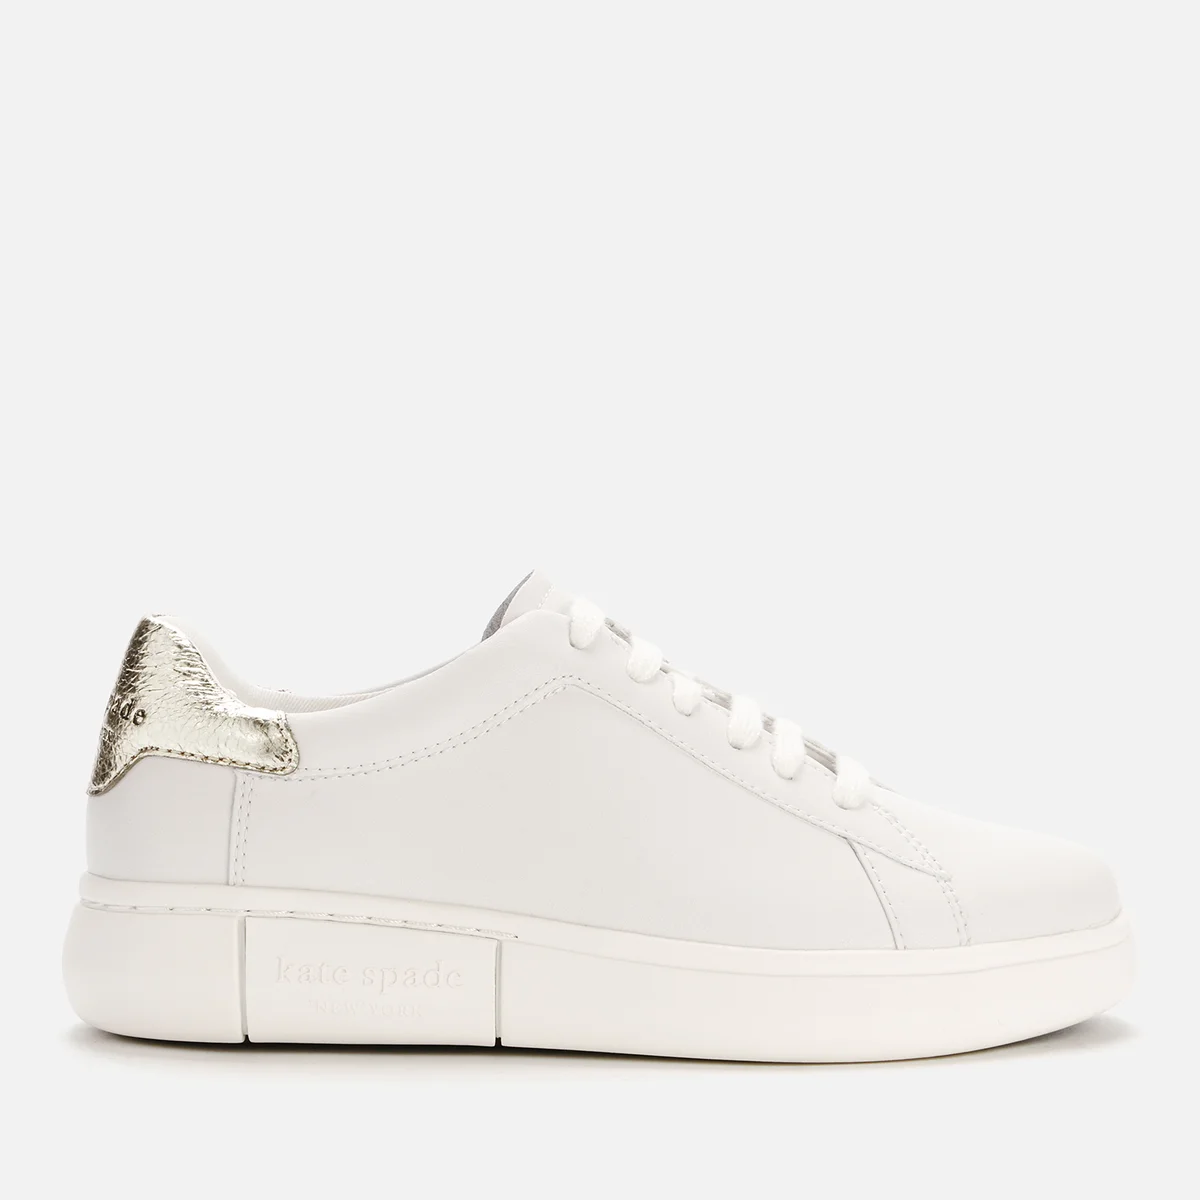 Kate Spade New York Women's Lift Leather Cupsole Trainers - Optic White/Pale Gold Image 1